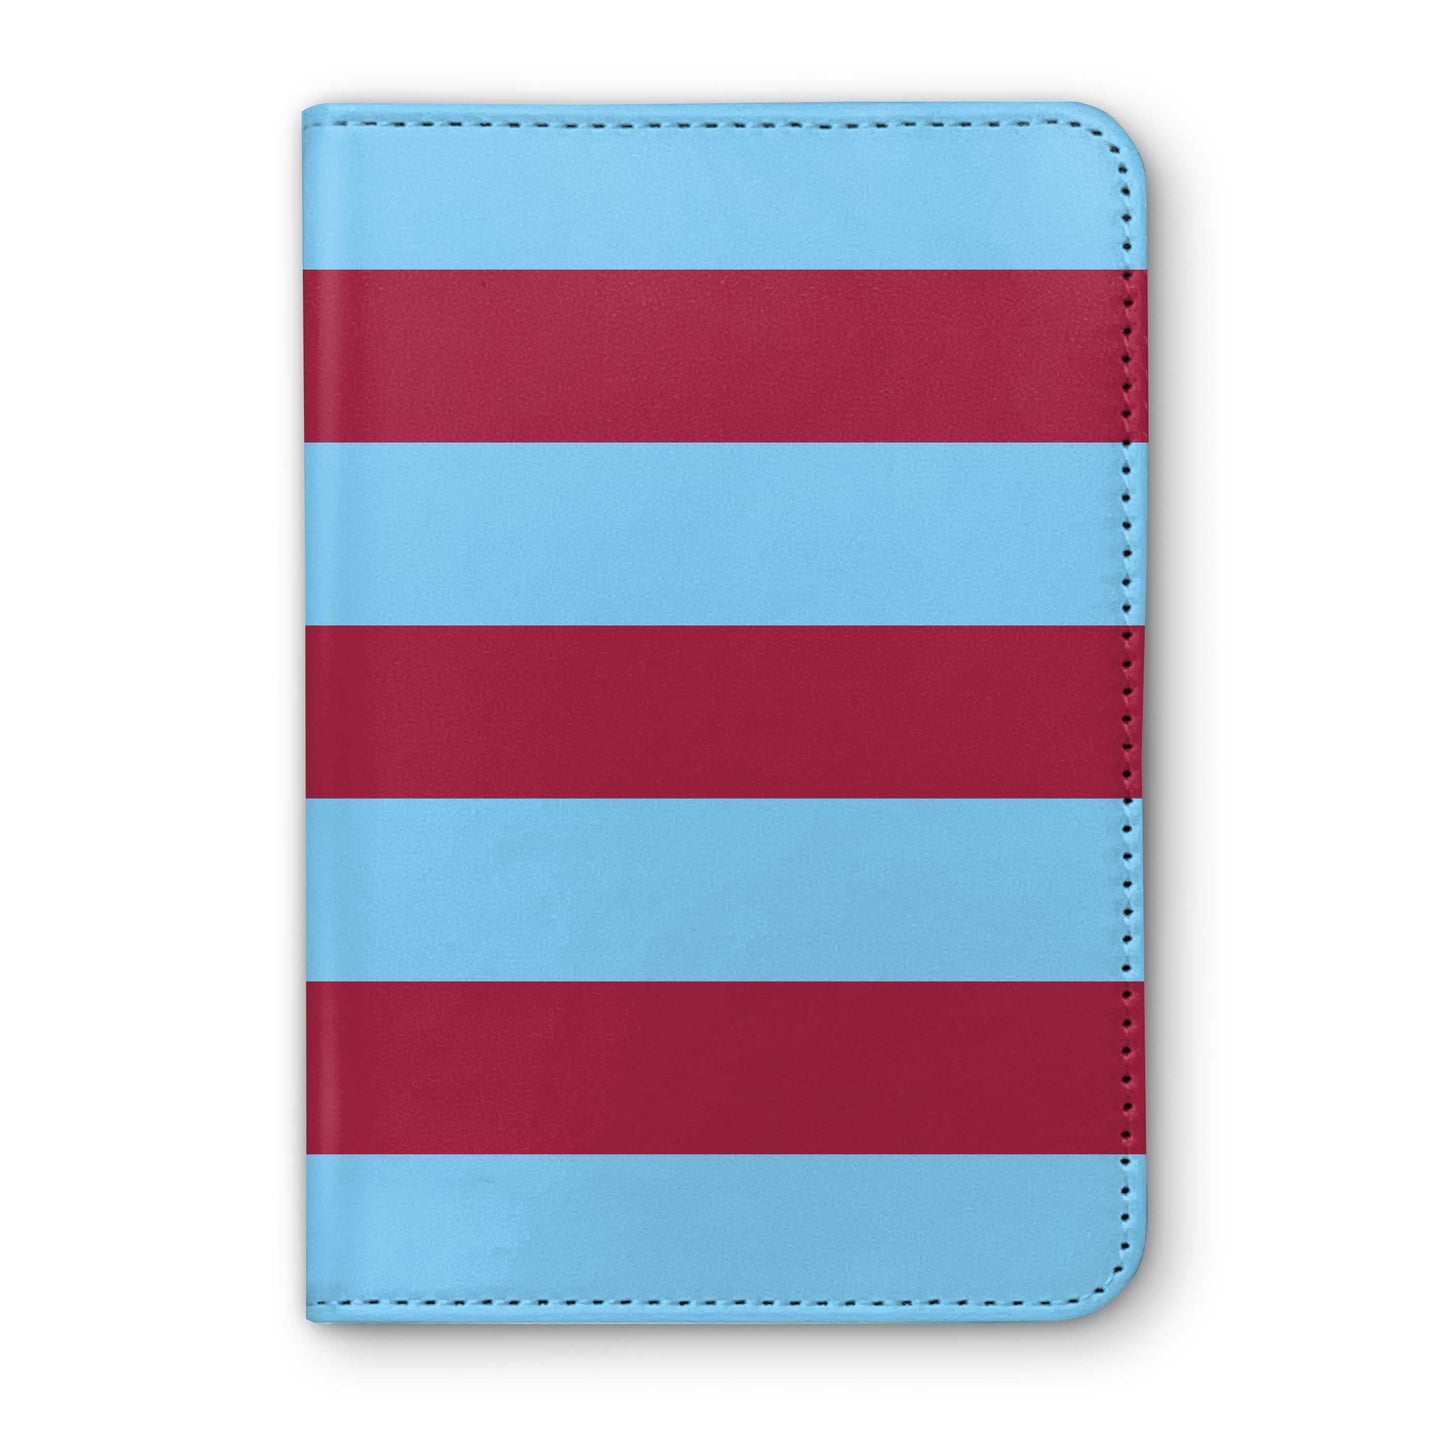 D G Staddon Horse Racing Passport Holder - Hacked Up Horse Racing Gifts